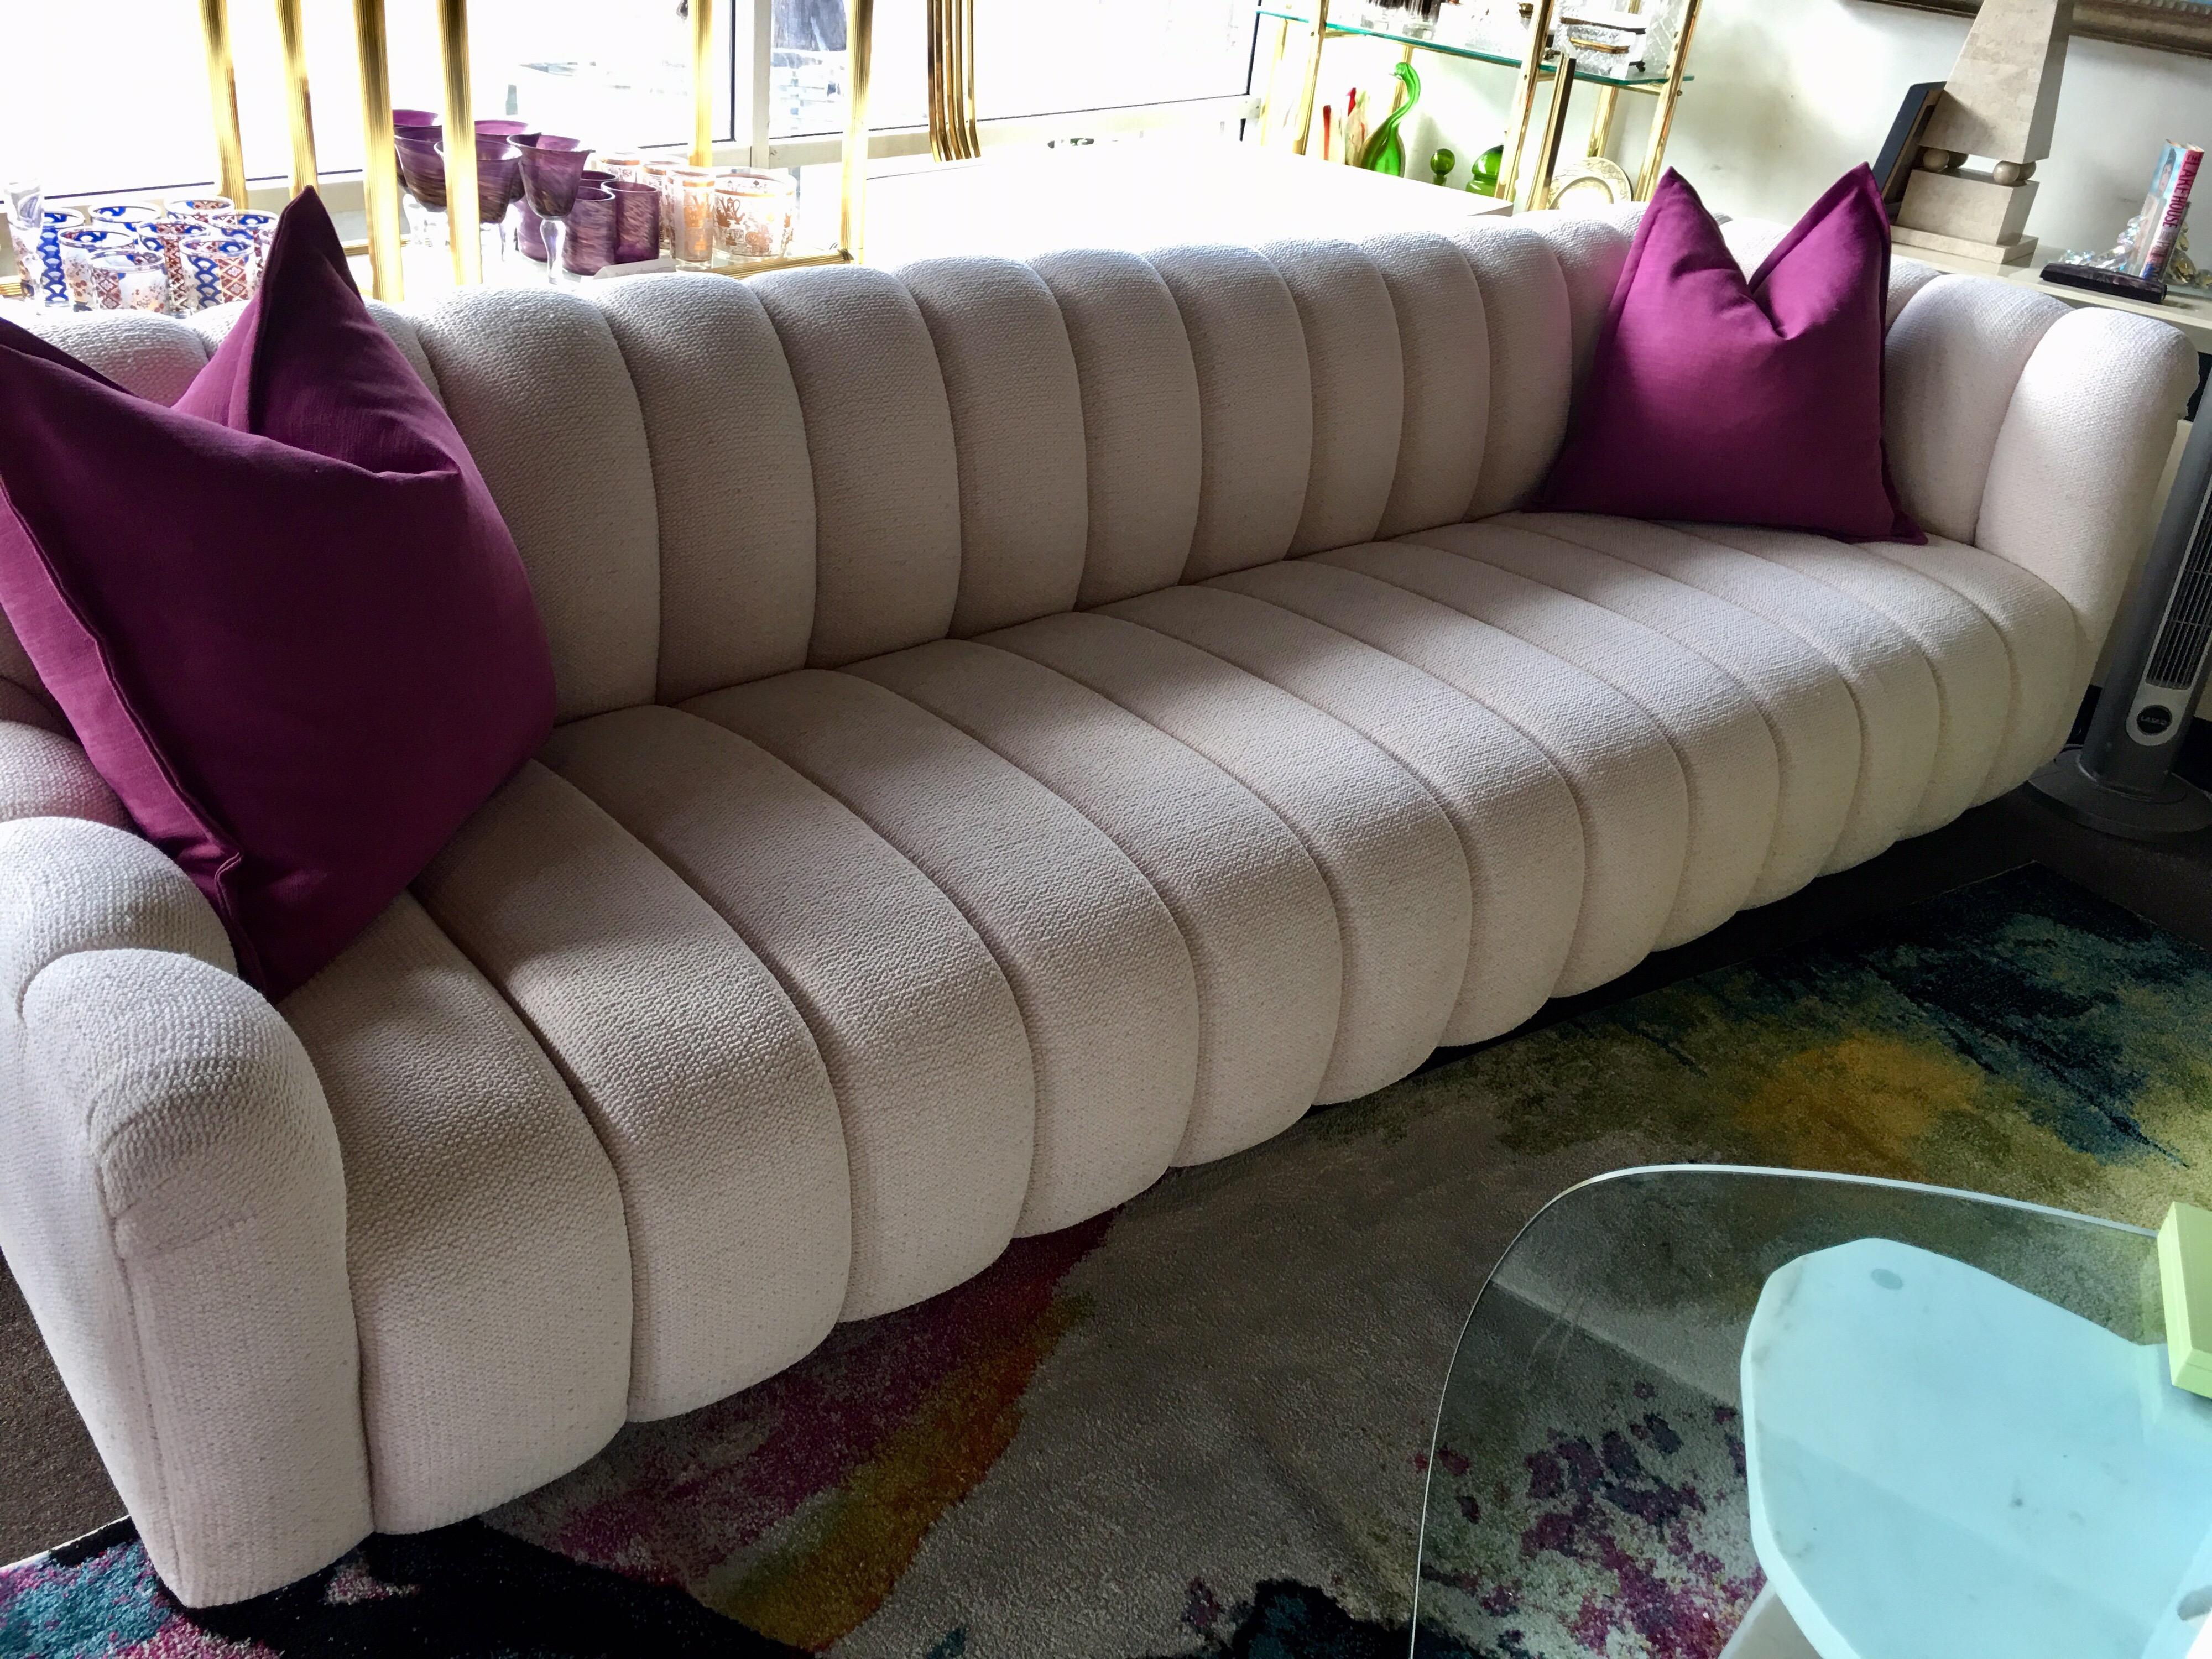 This sofa has become an iconic piece of Palm Springs upholstered furniture. Both Steve Chase and Gary Jon custom made these pieces for upscale, architectural residences in the late 1970s and 1980s. This prime example was designed by Gary Jon, a